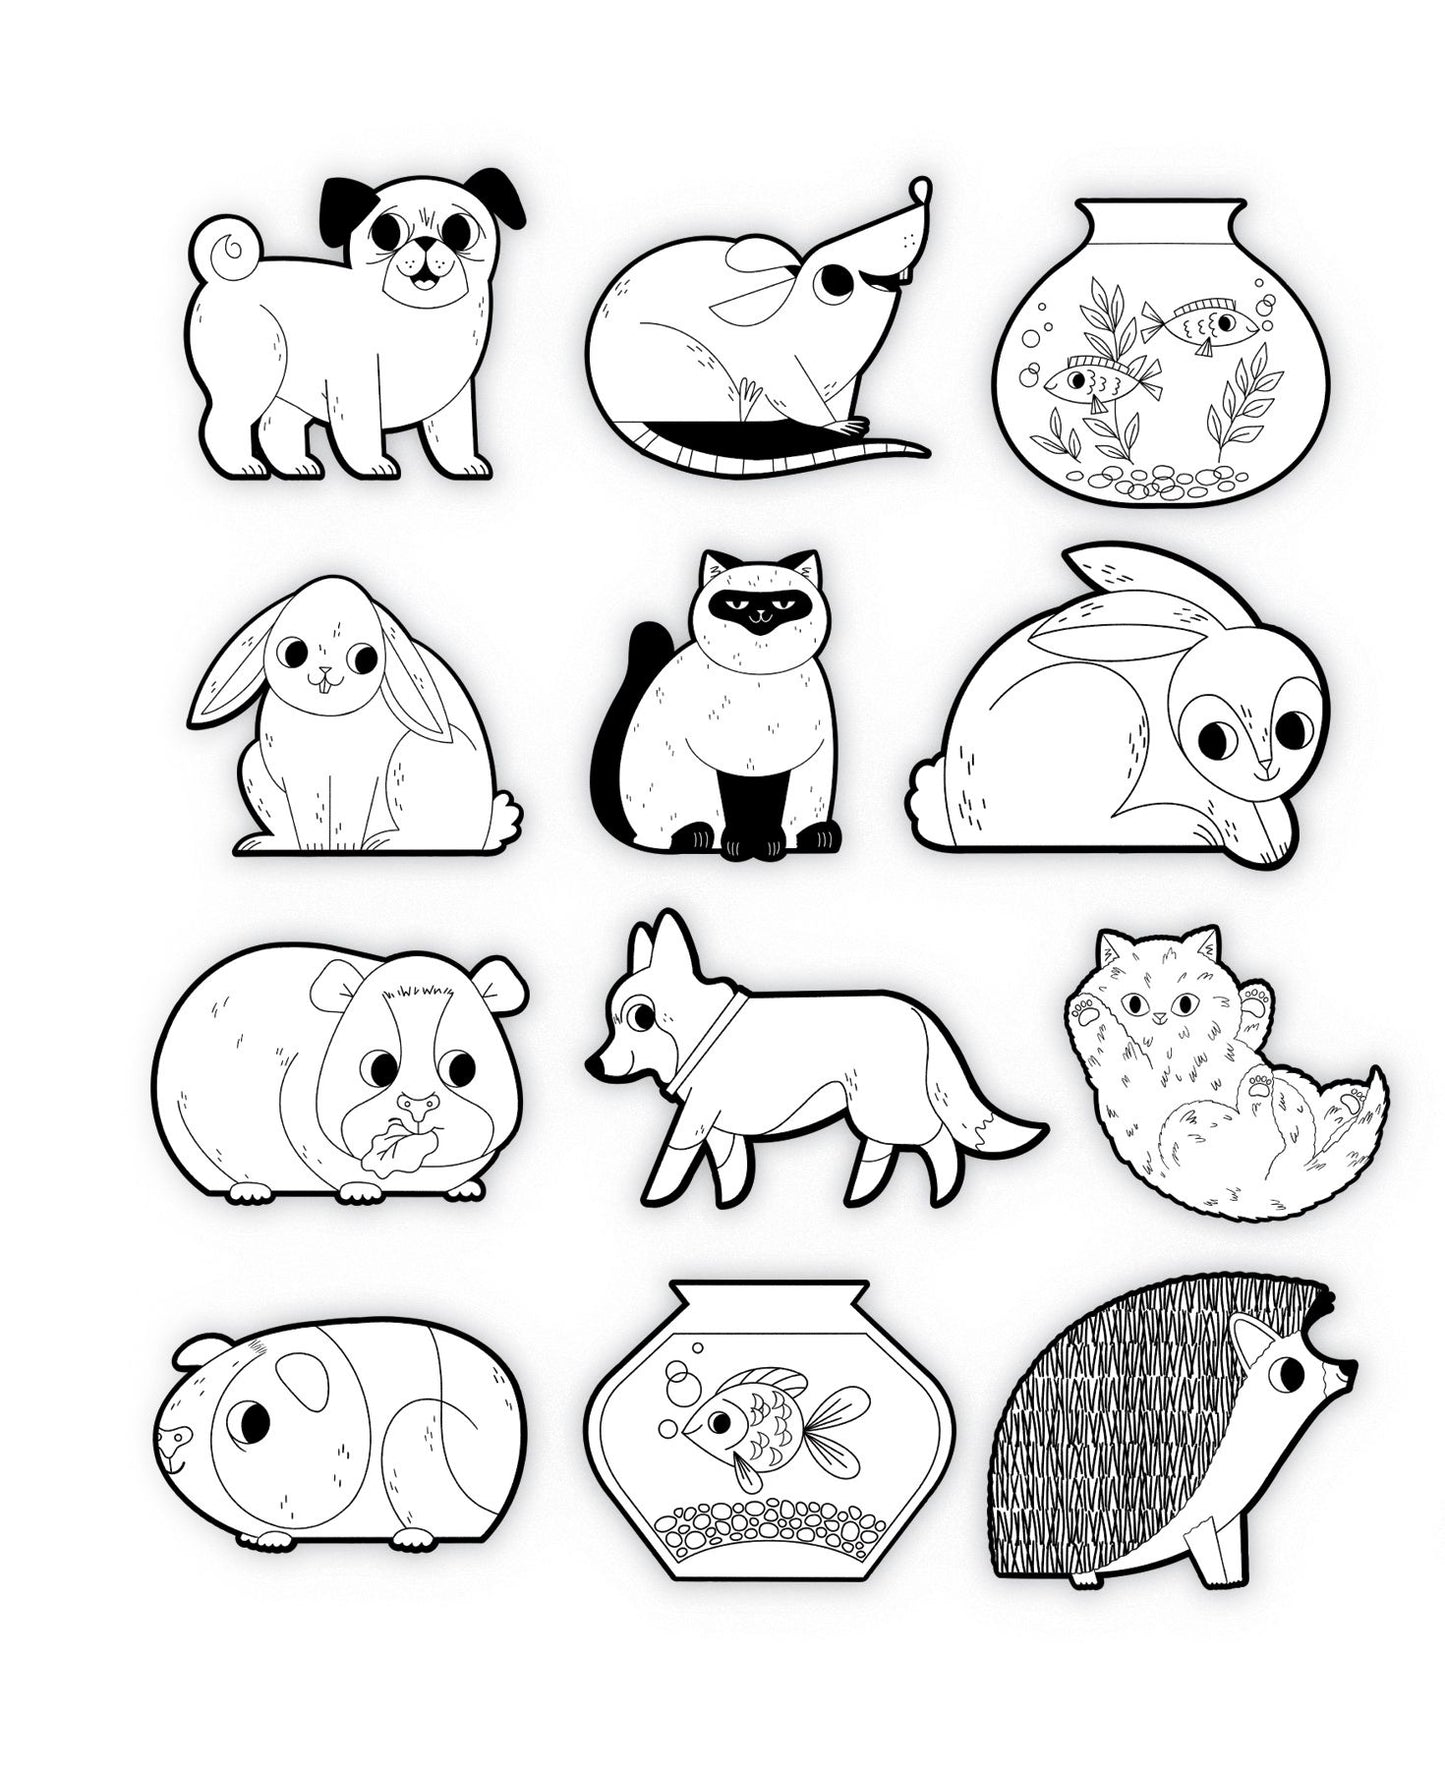 Playful Pets Coloring Stickers